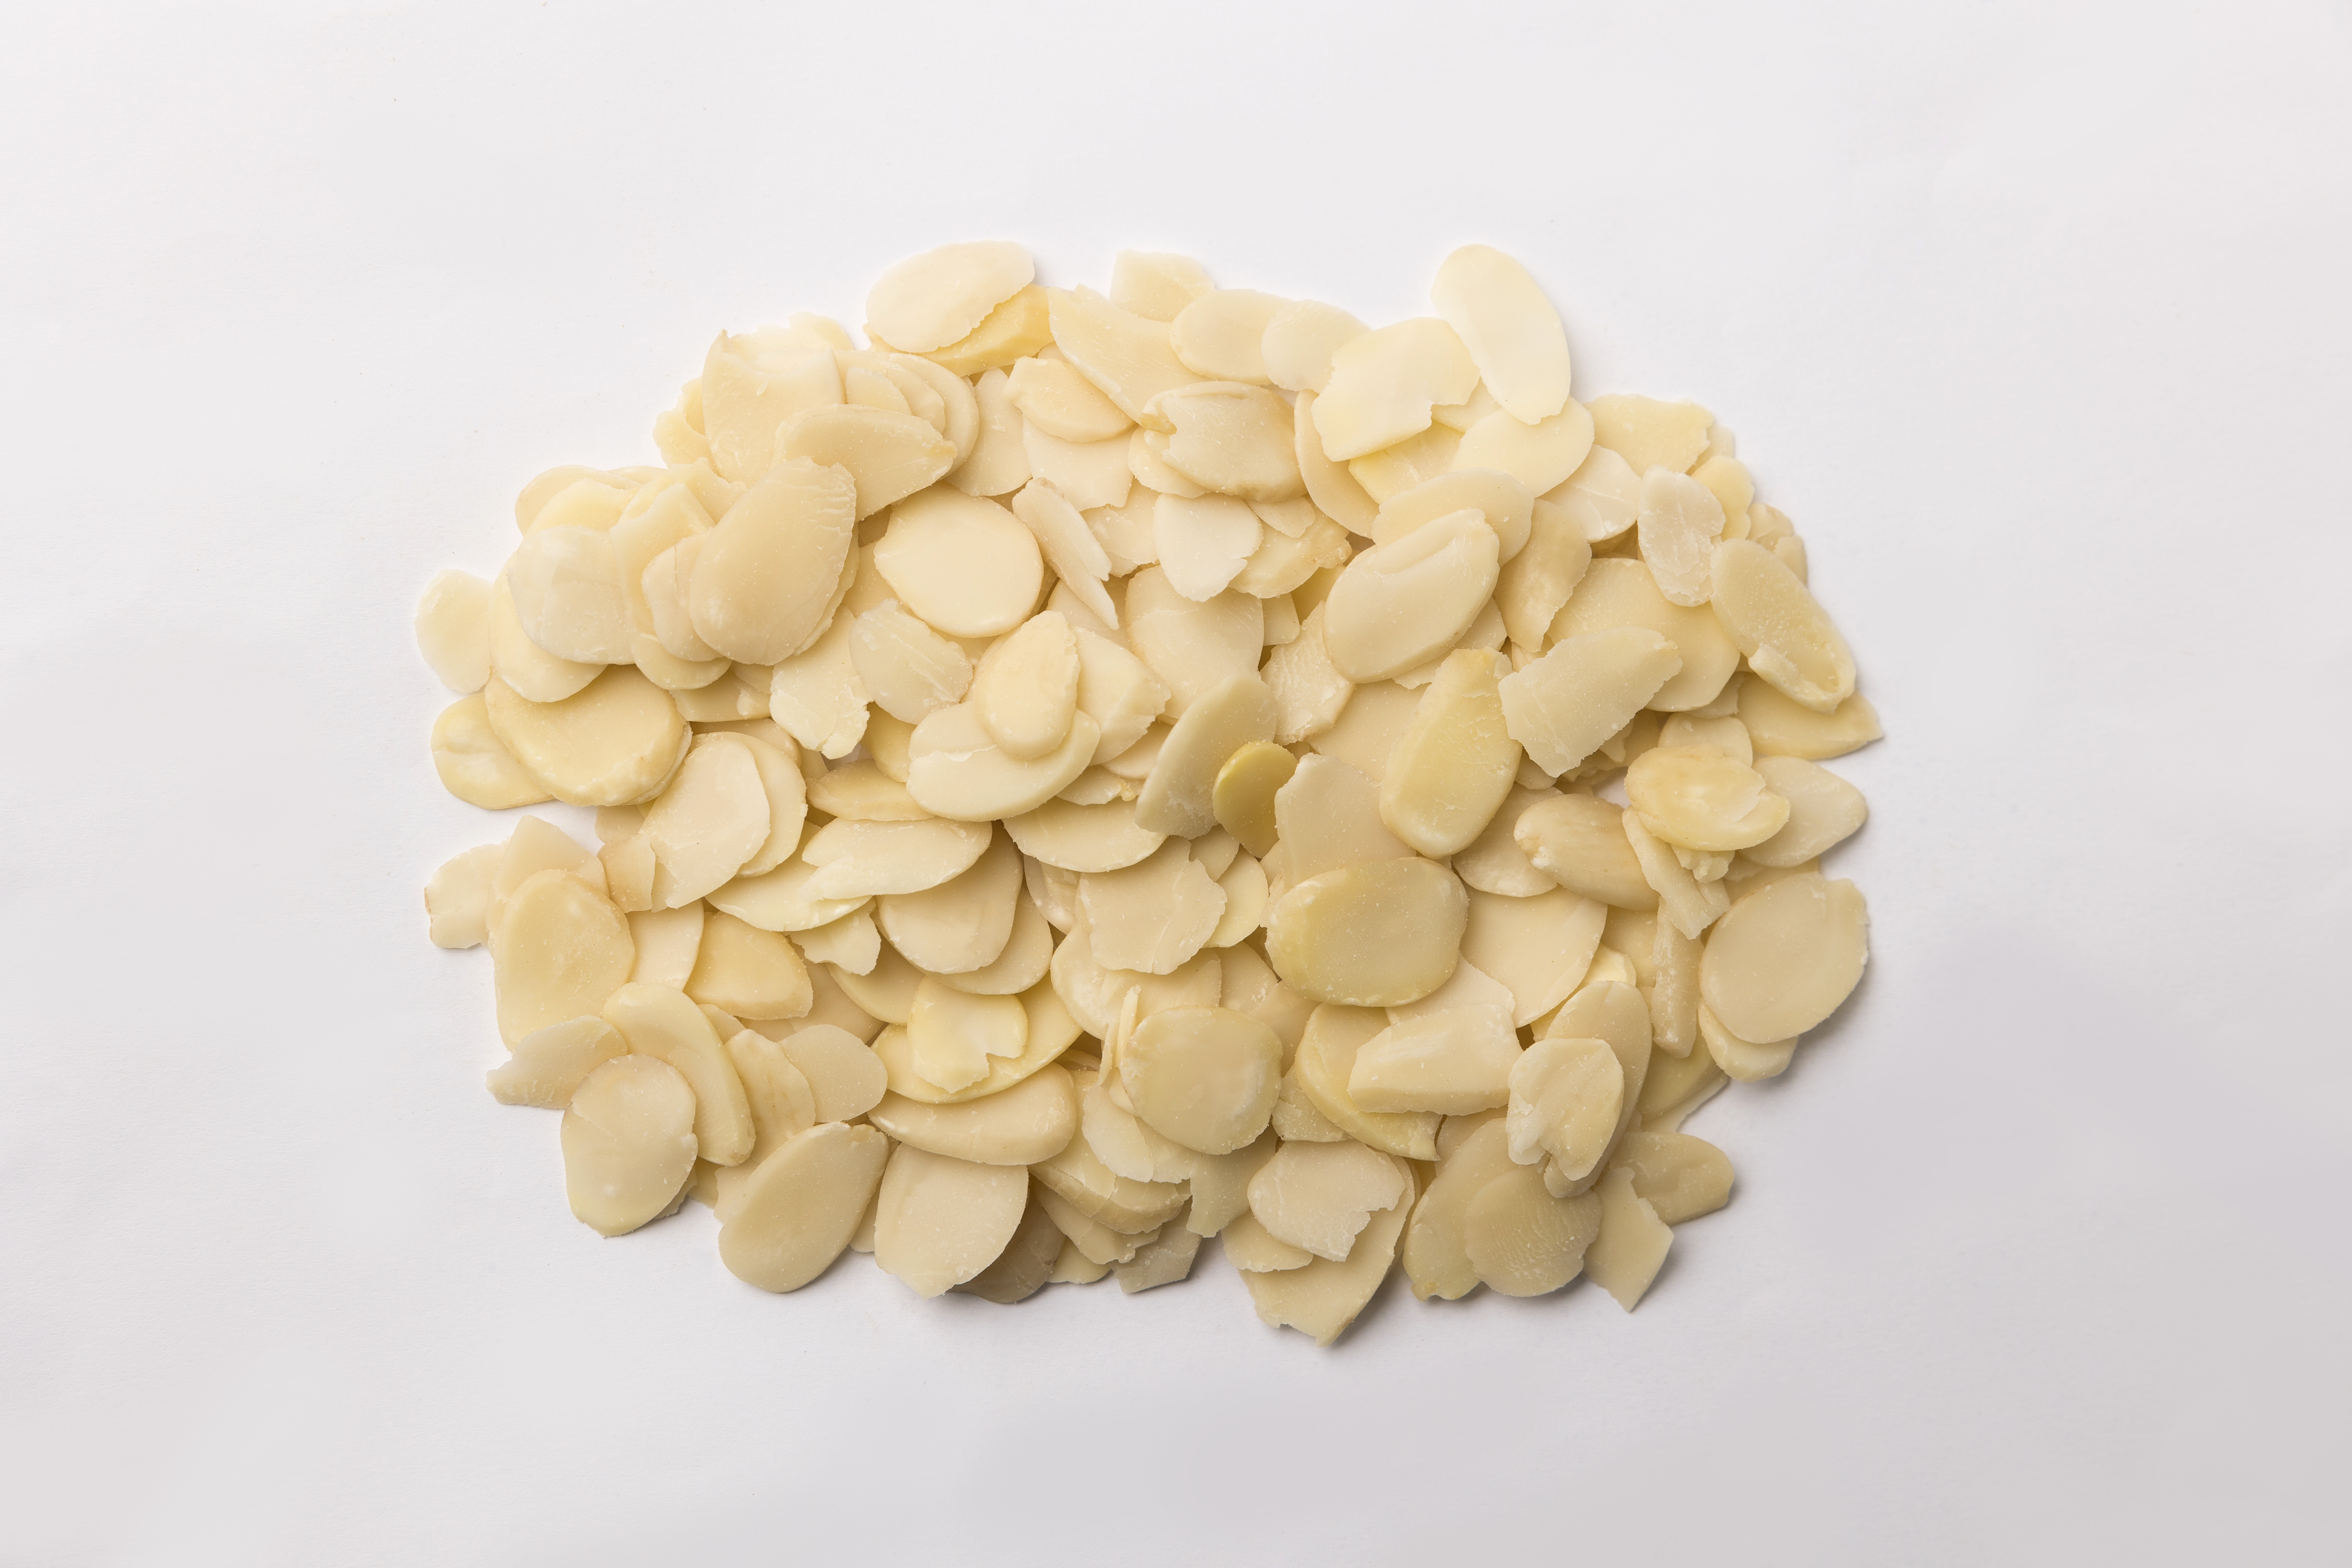 Blanched sliced almonds